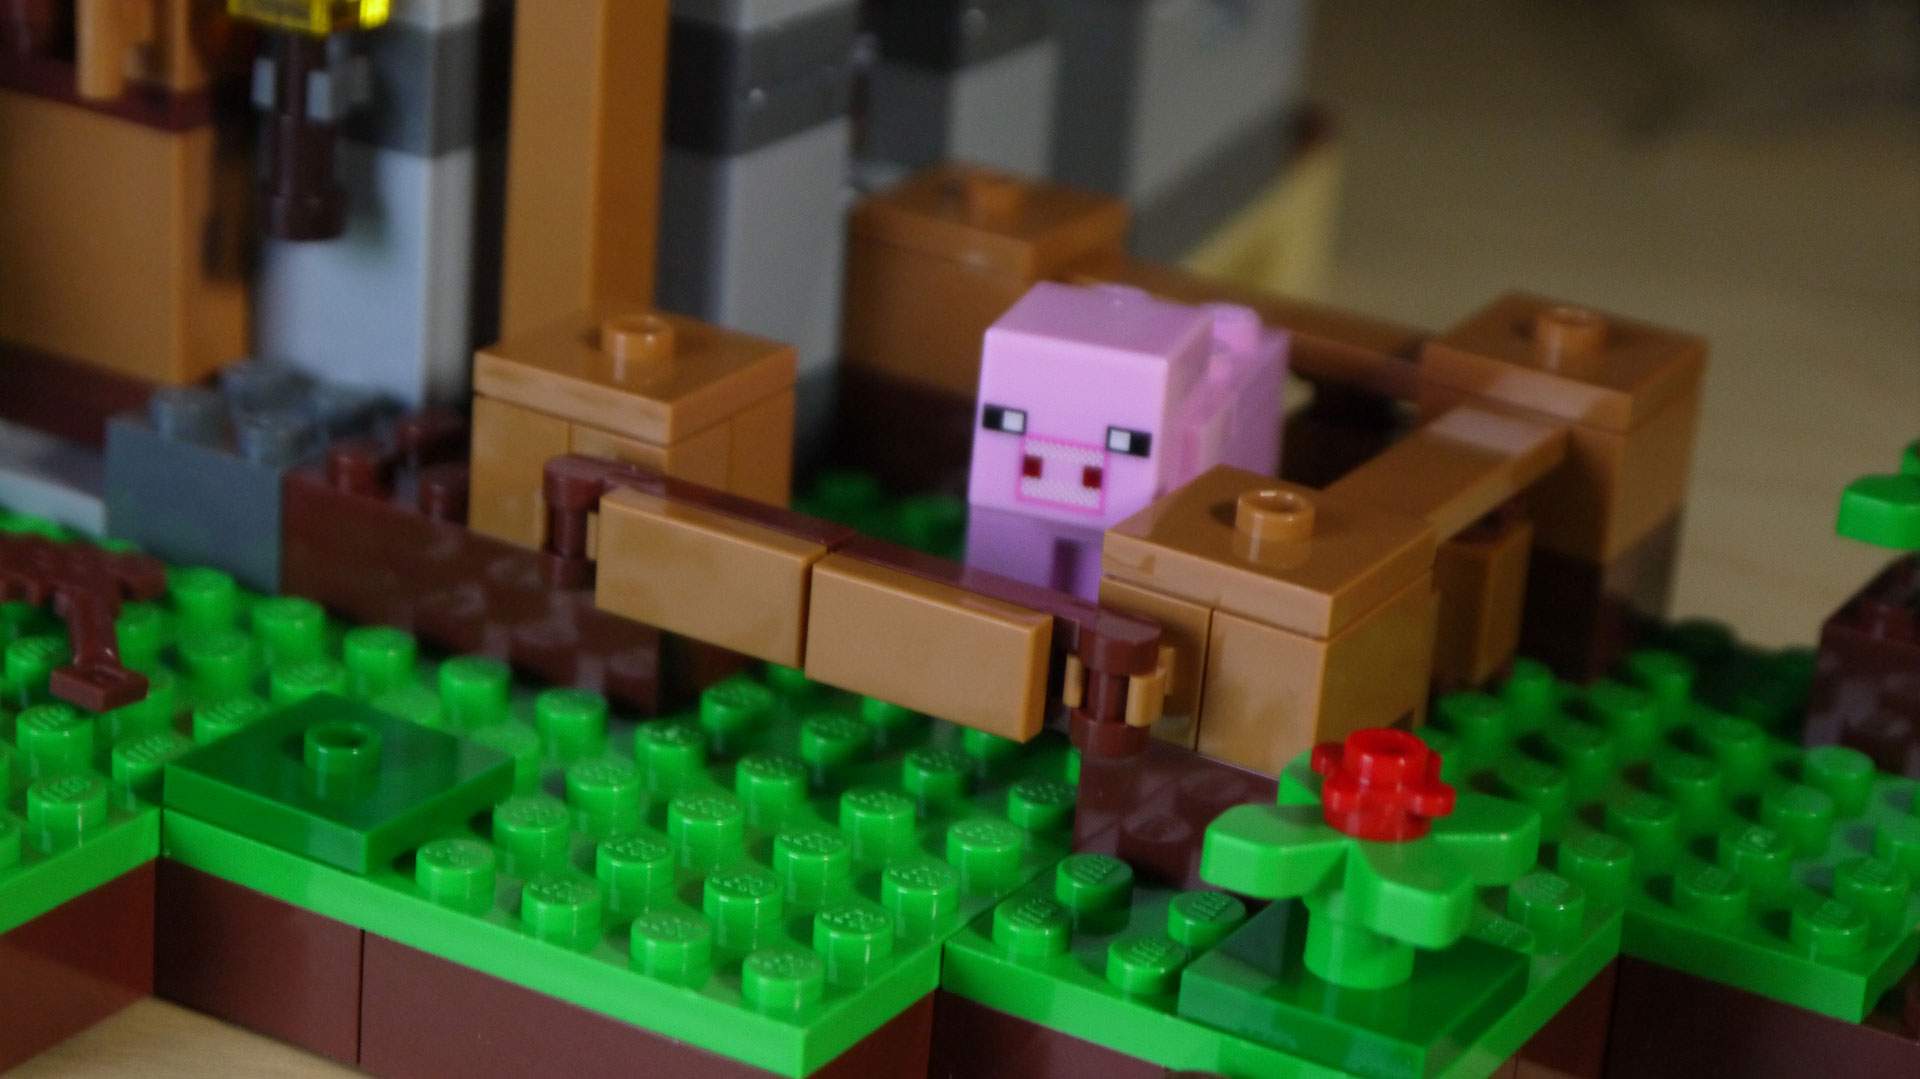 Building LEGO Minecraft Is Much More Fun At Minifig-Scale